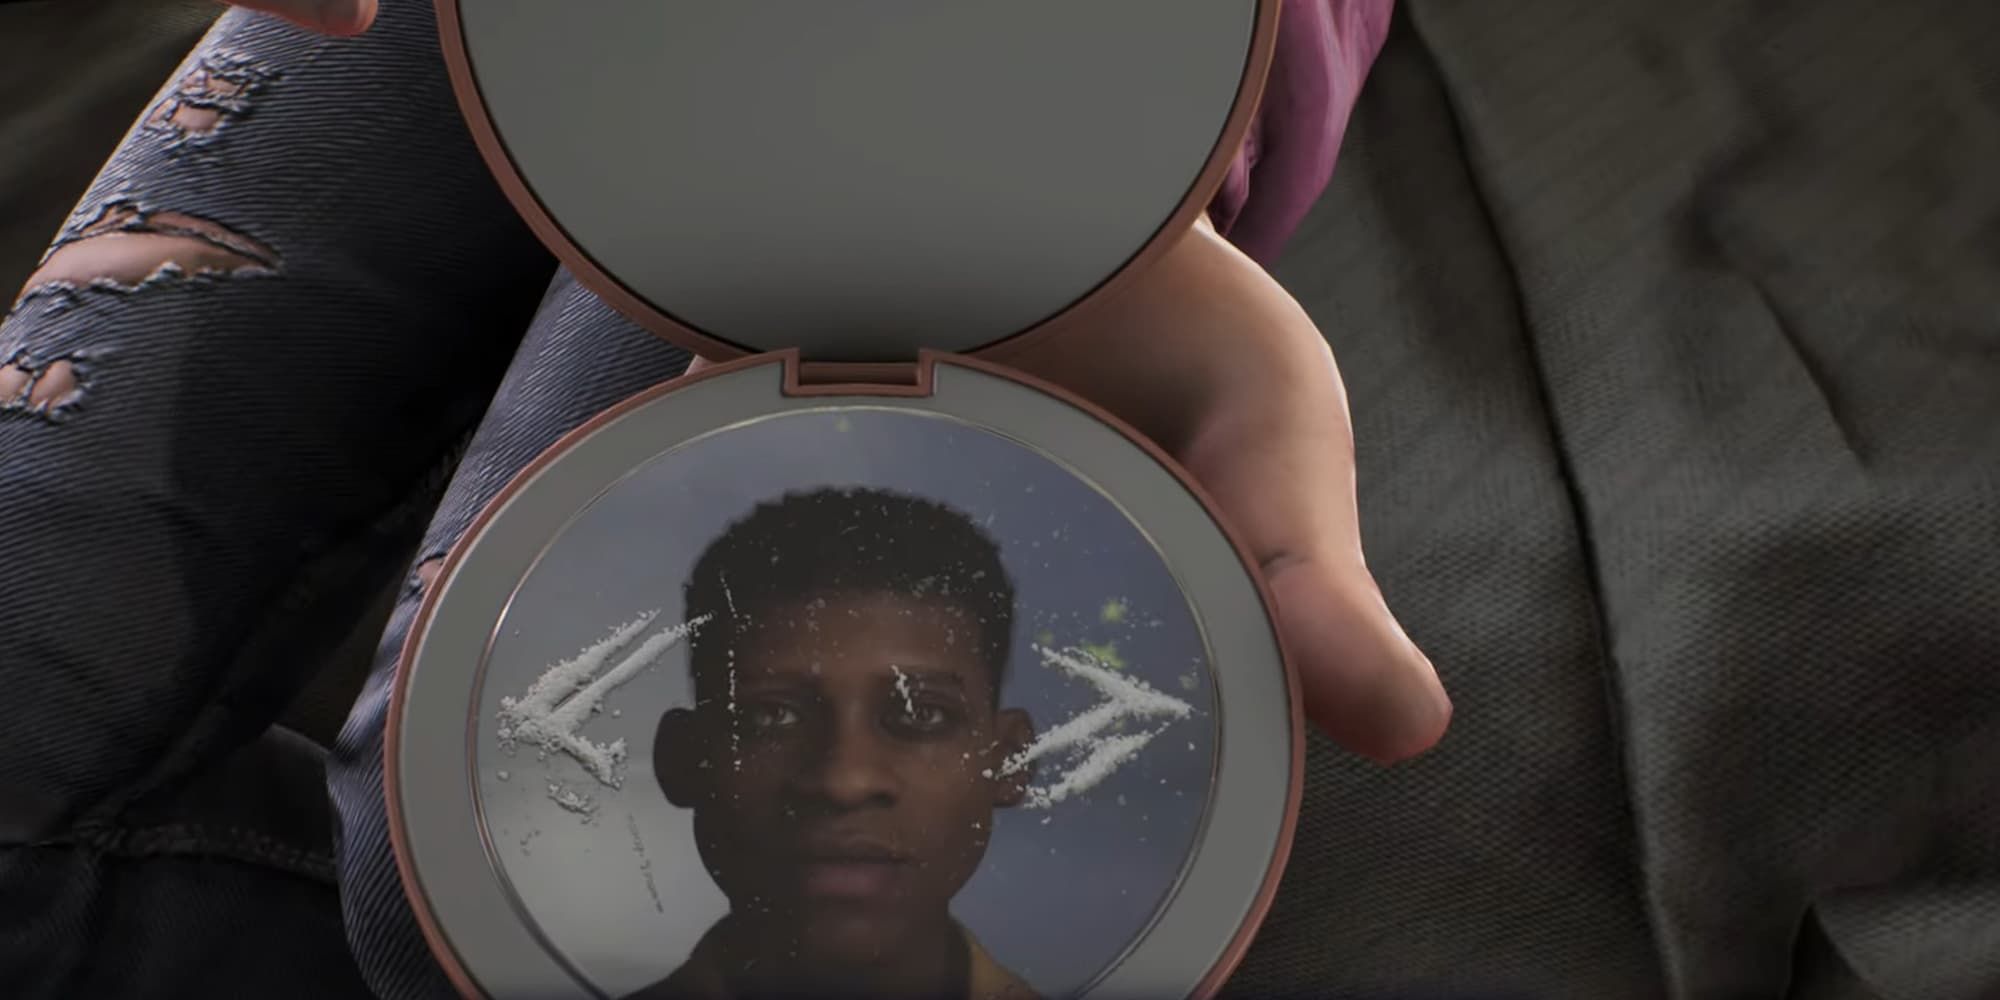 The compact mirror shows a face for the player to select as their appearance in High on Life.